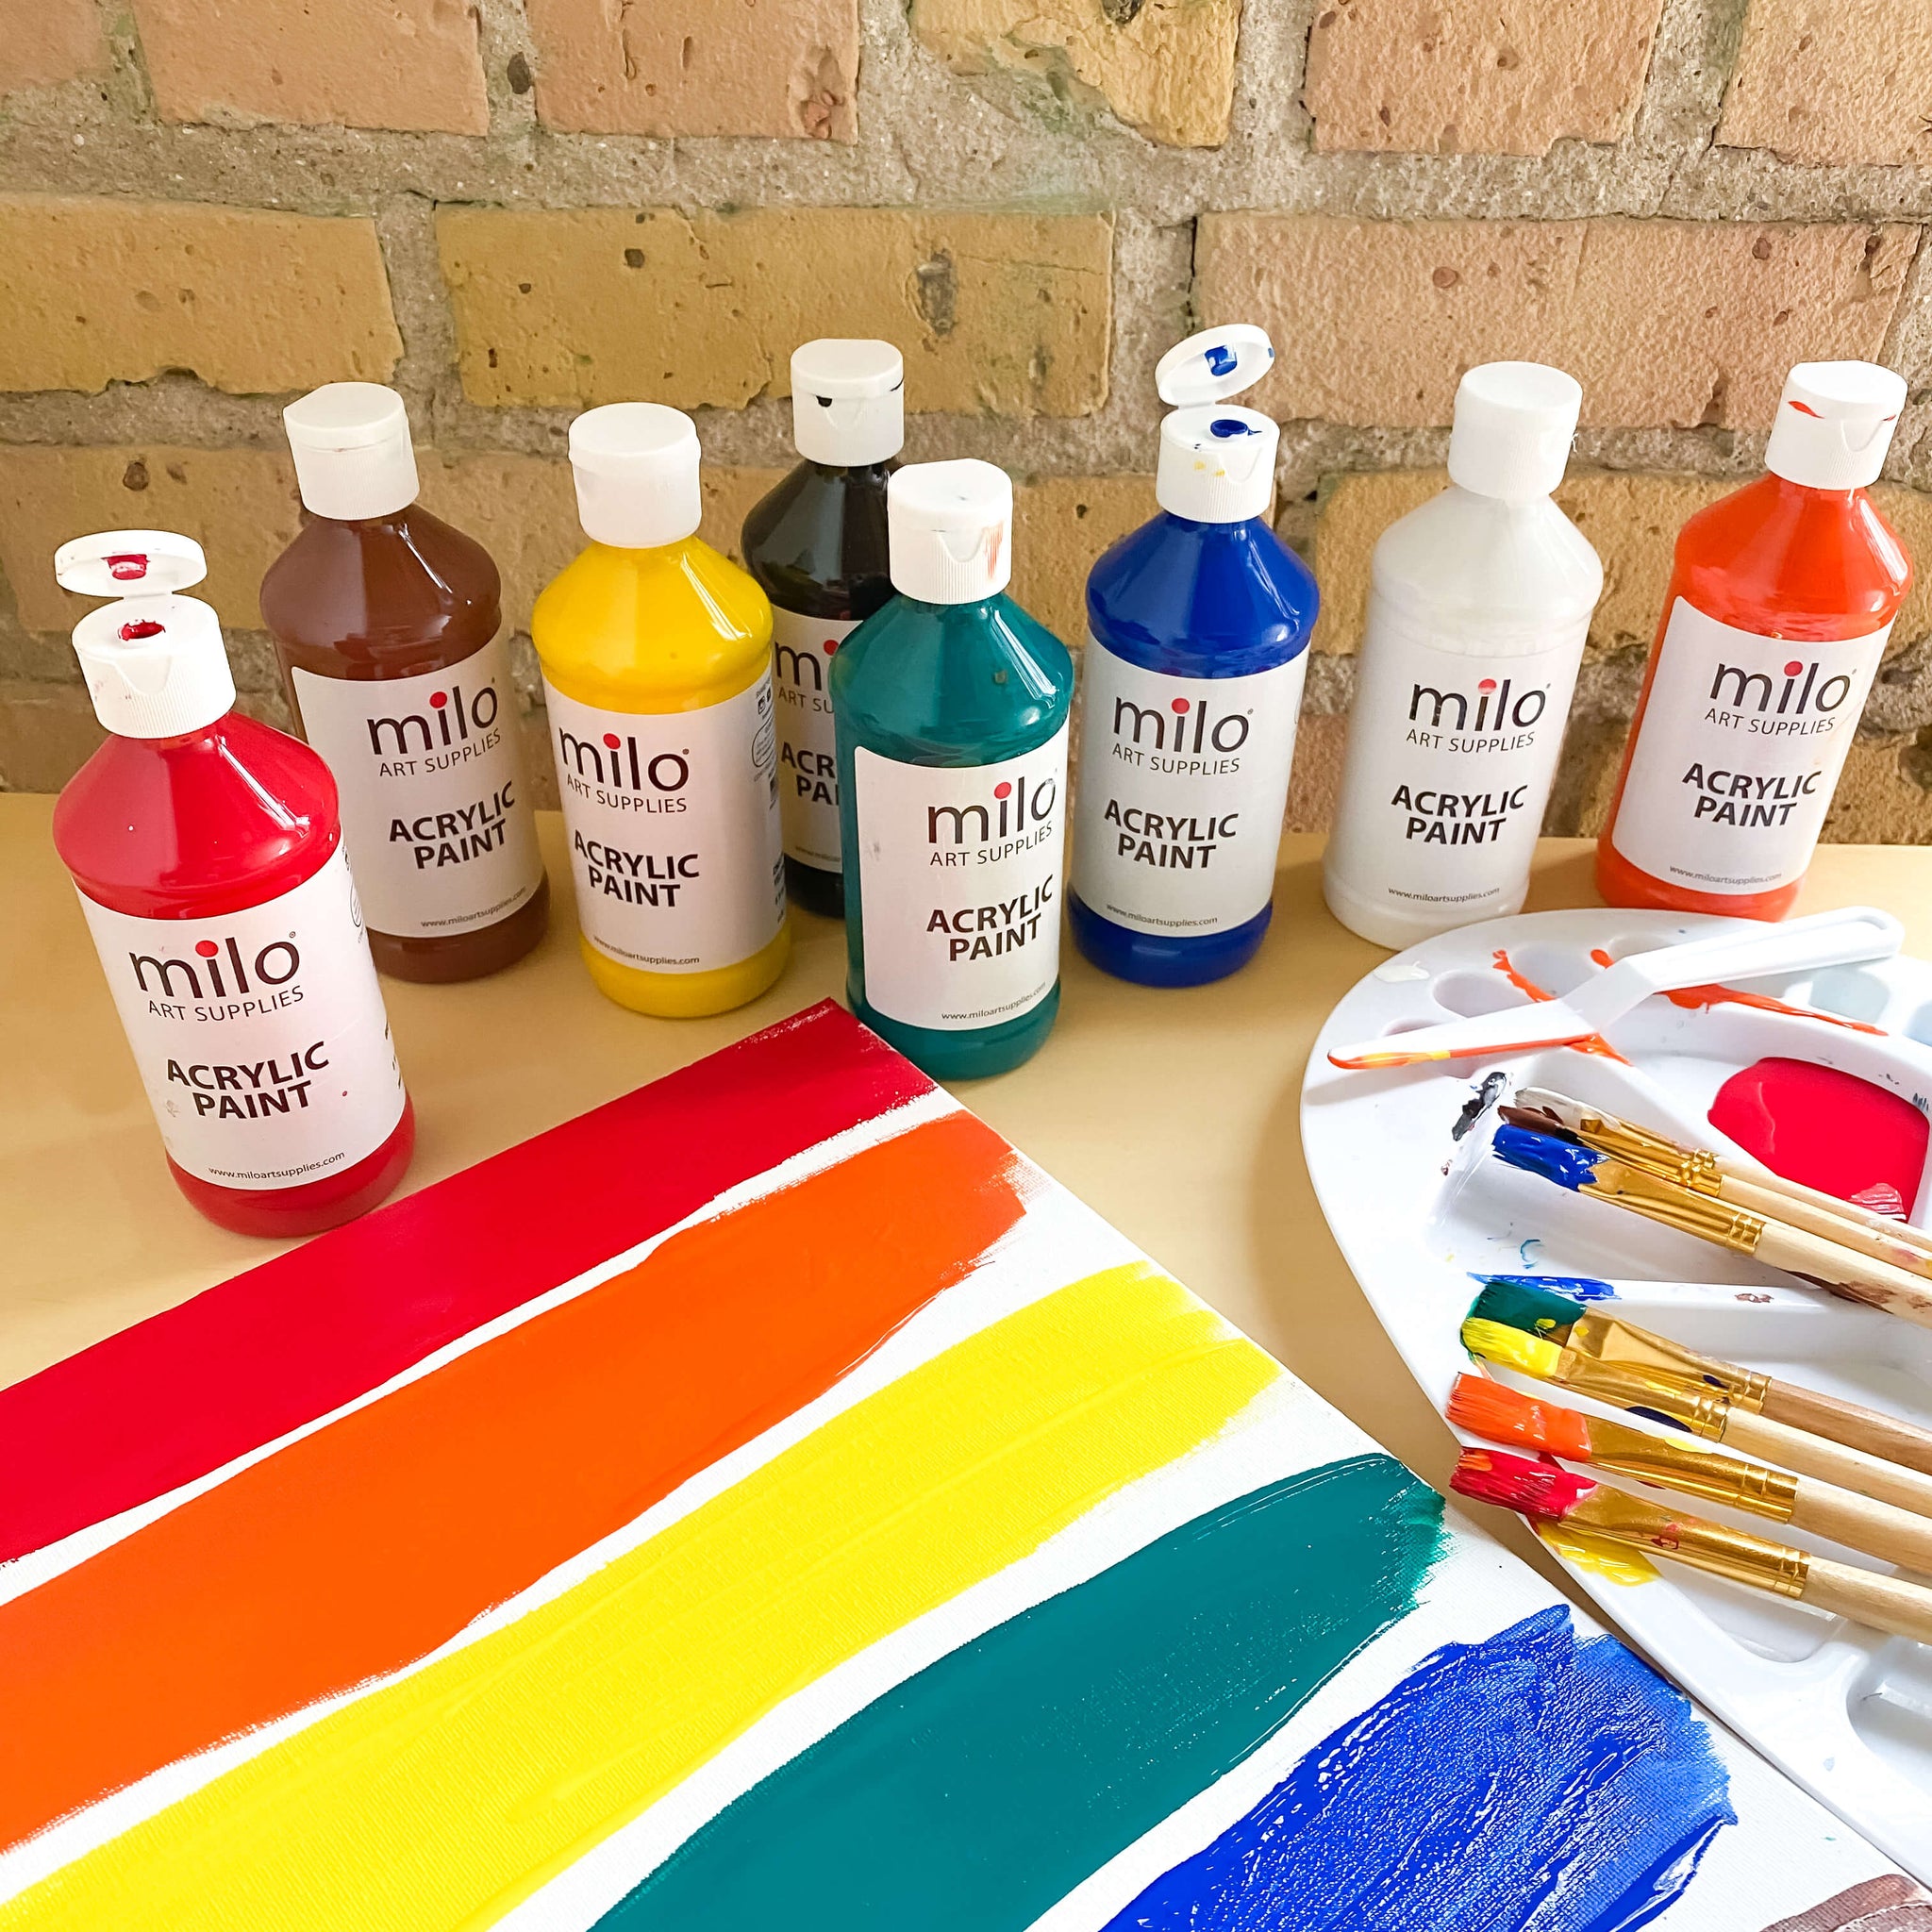 Milo Acrylic Paint Set of 12 Colors | 16 oz Bottles | Student Primary Colors Acrylics Painting Pack | Made in The USA | Non-Toxic Art & Craft Paints